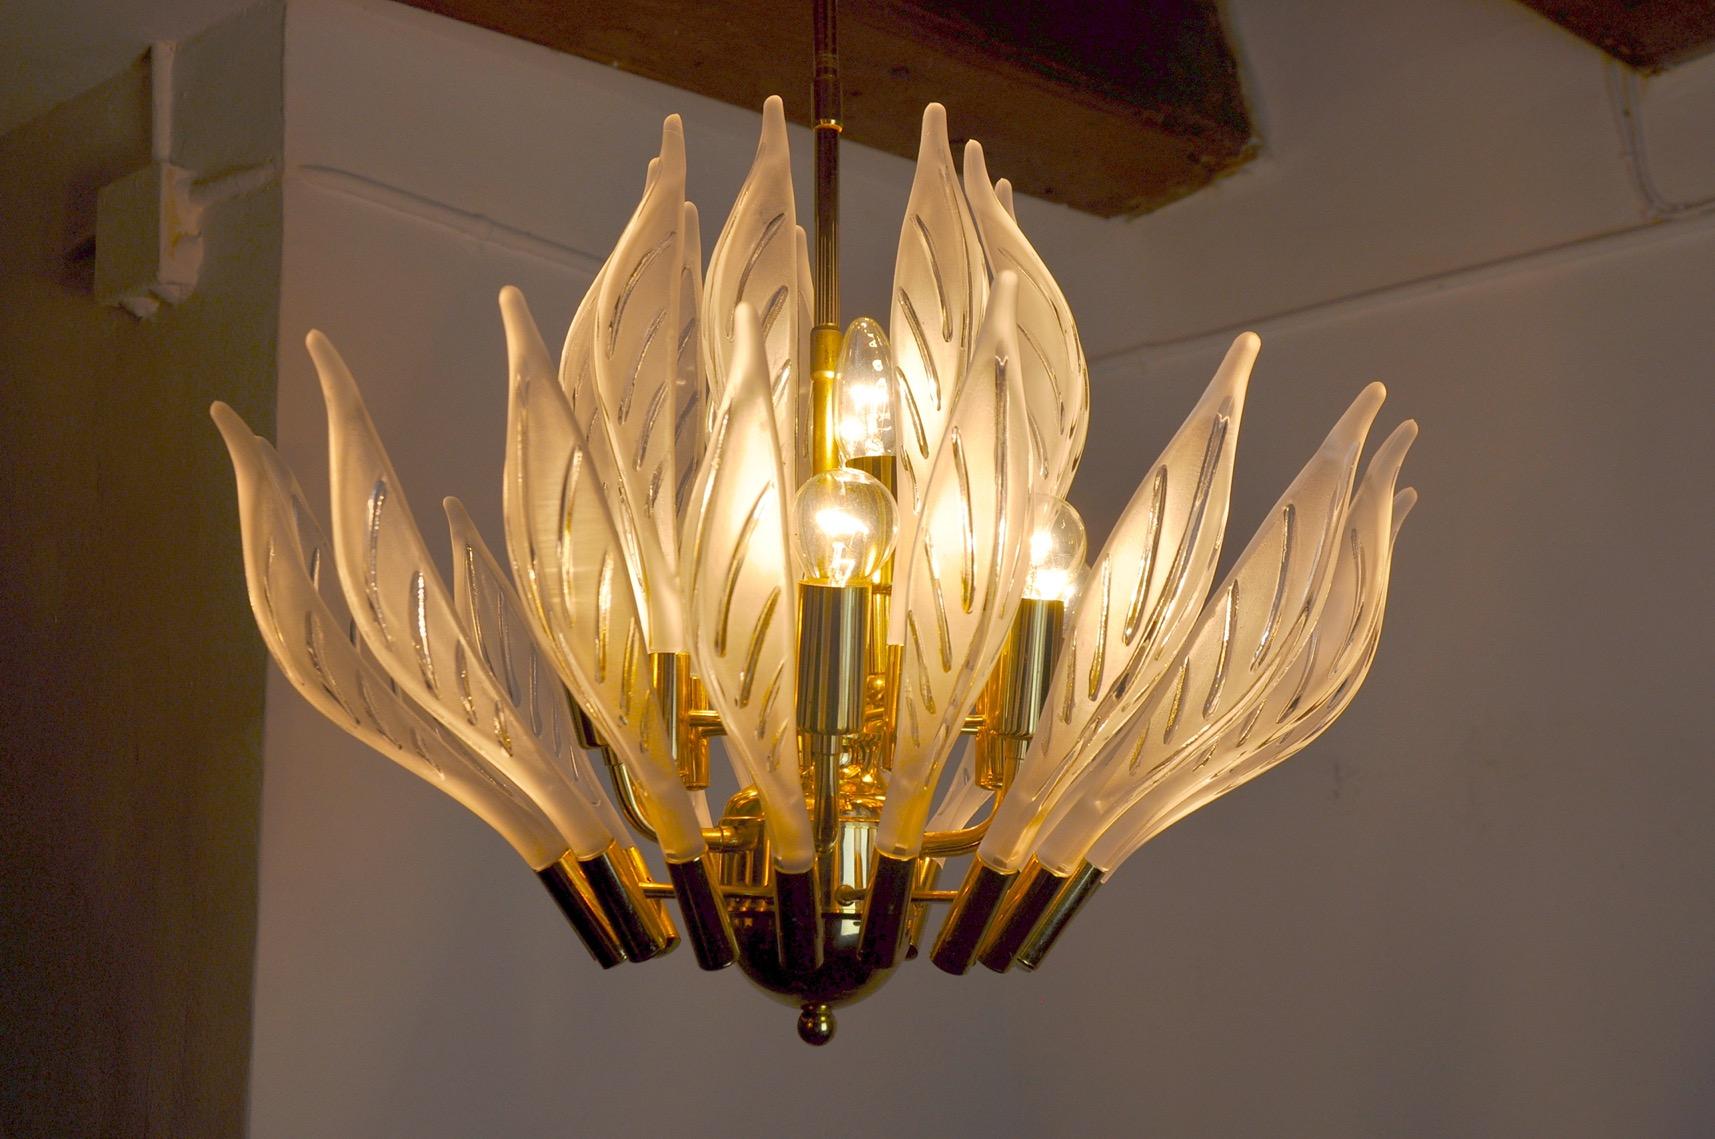 Superb and rare floral chandelier by venini, designed and produced in Italy in the 1970s.
This unique object is composed of leaf-shaped crystals spread over two levels of a golden structure.
Unique object that will illuminate wonderfully and bring a